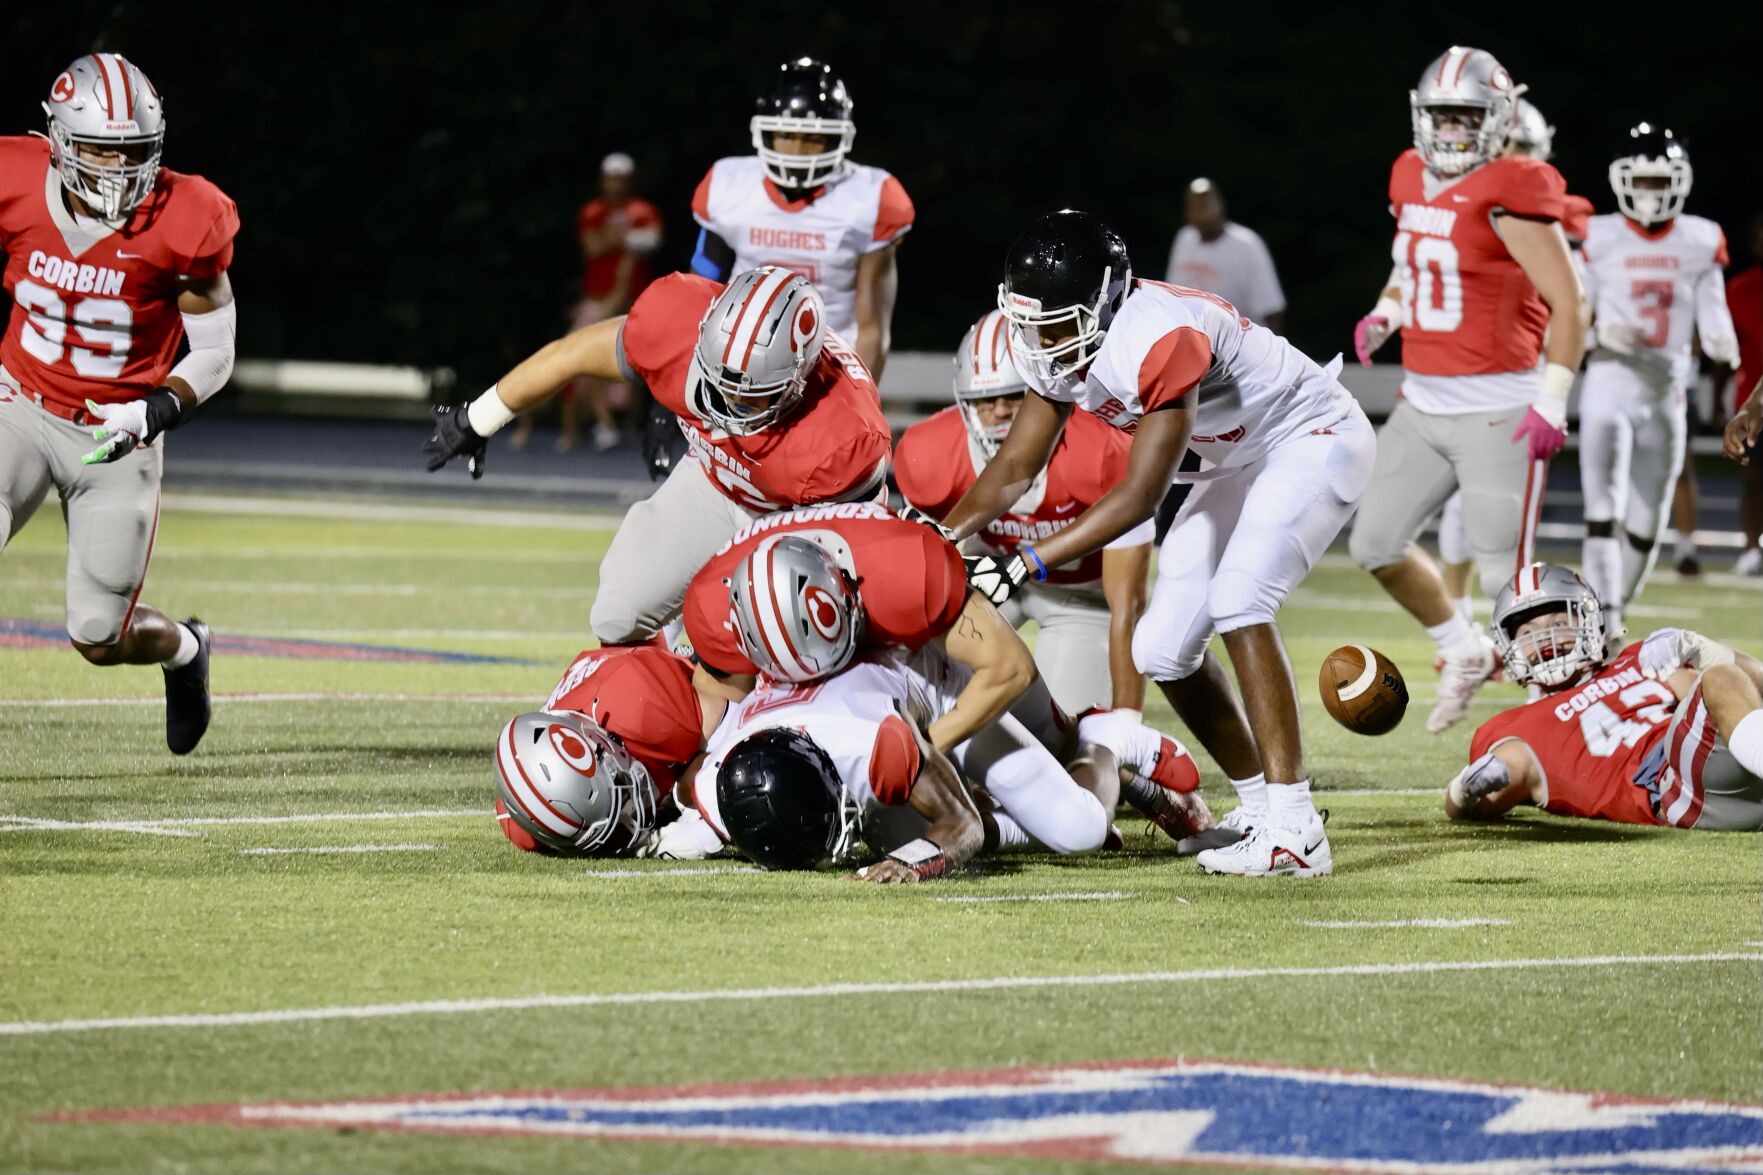 Corbin Redhounds gear up for tough matchup with talented North Hardin team